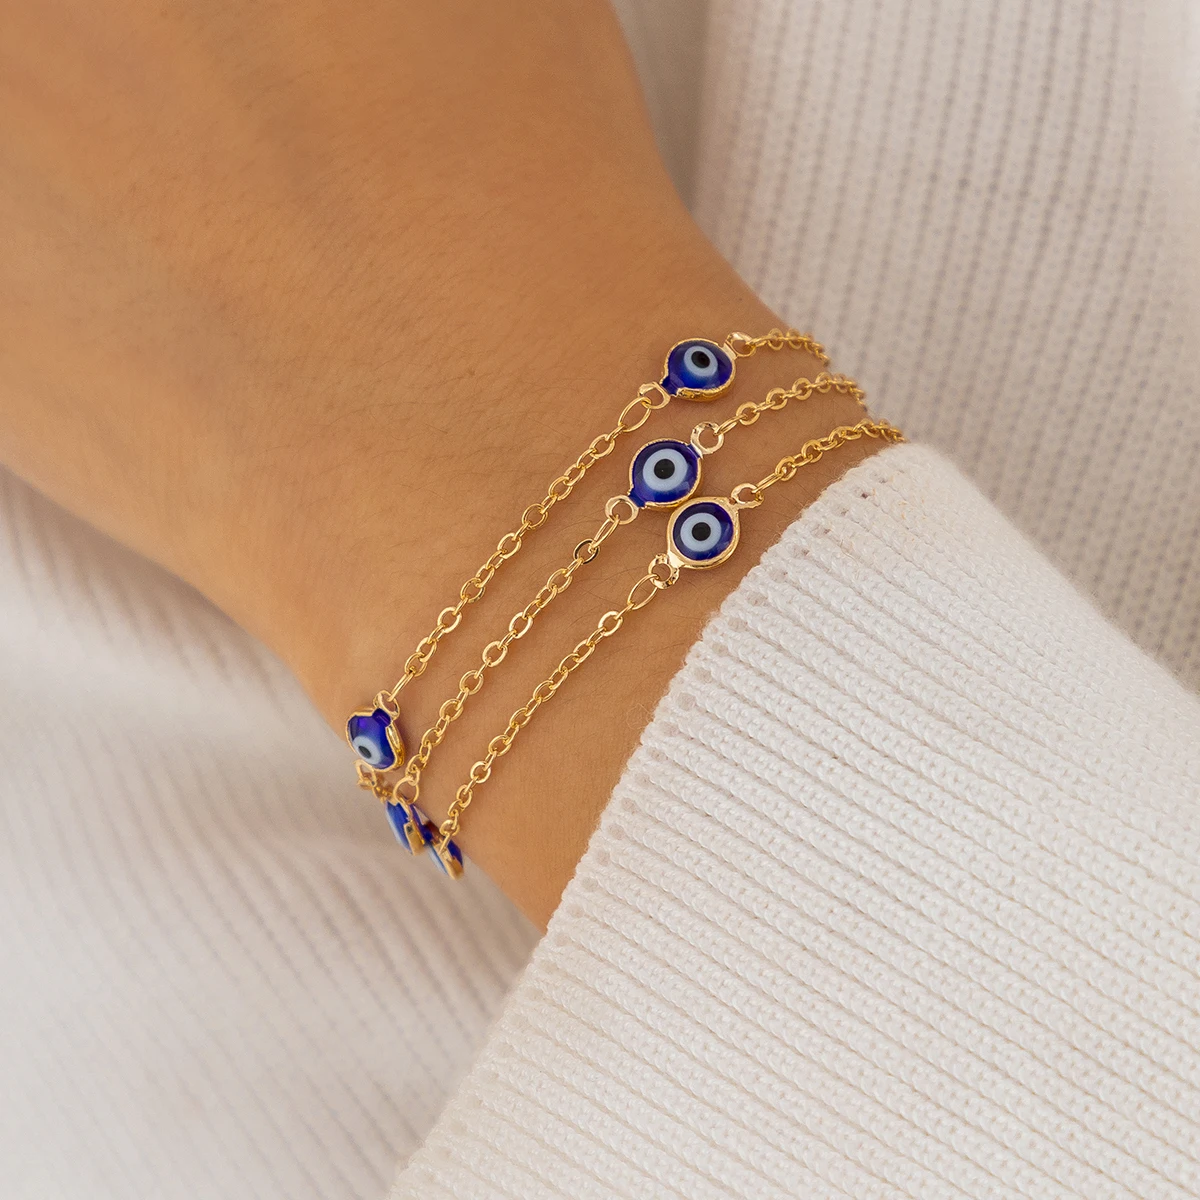 

PuRui Simple Turkish Blue Lucky Eye Charm Bracelet Gold Color Adjustable Copper Chain Bangles for Women Jewelry Wedding Party